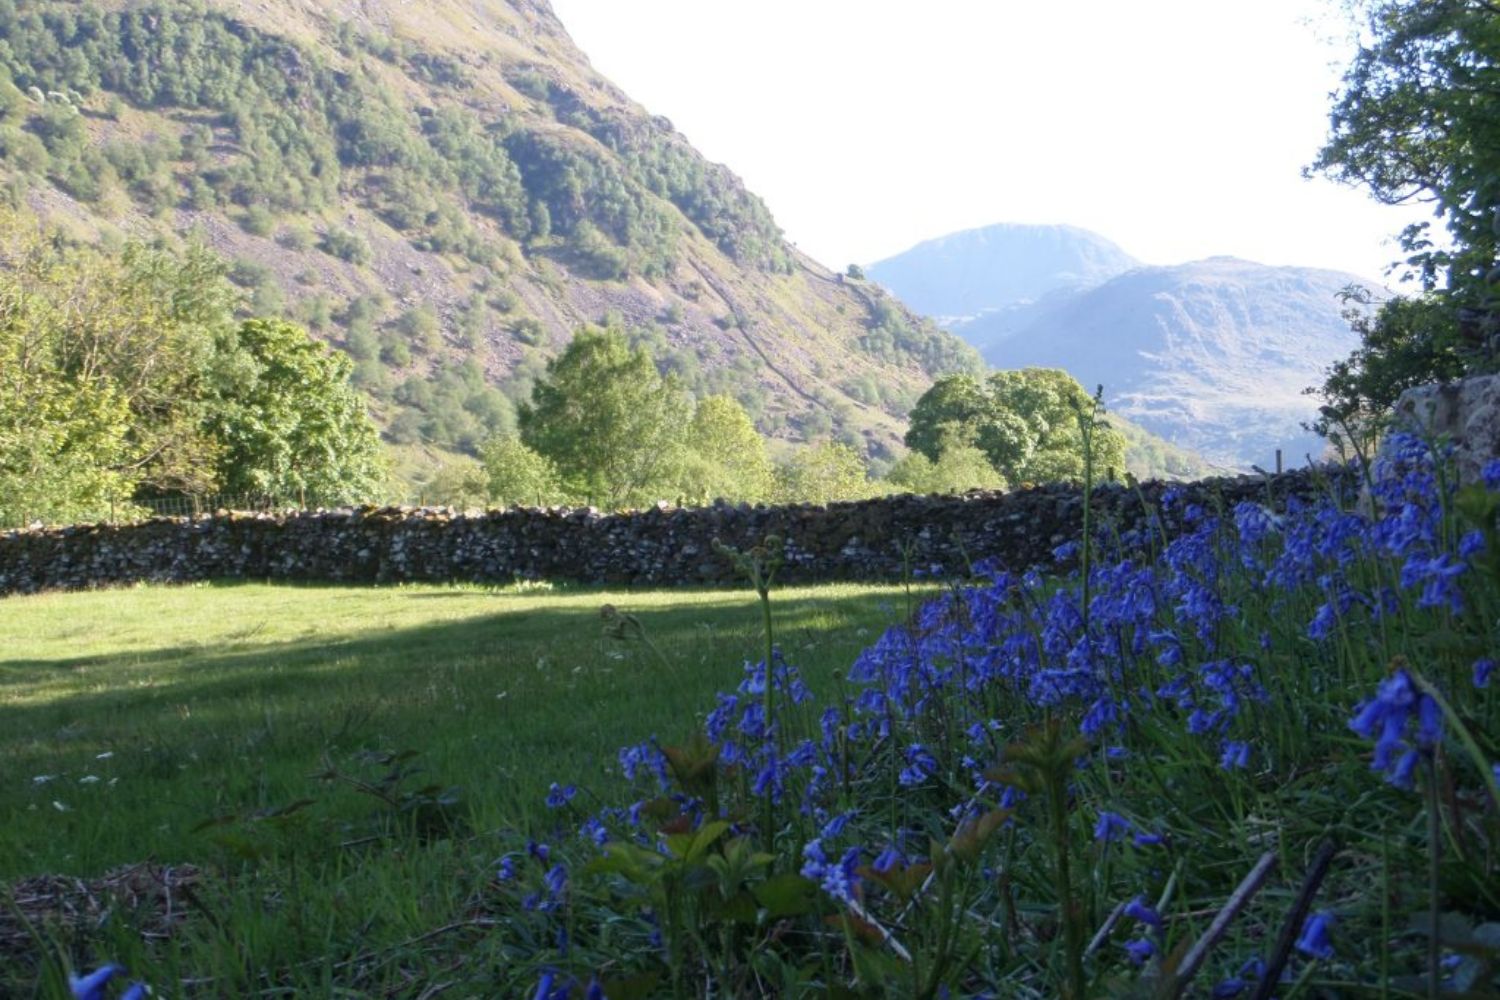 Purple flowers growing on bank with mountains in background - Seatoller Farm, Lake District